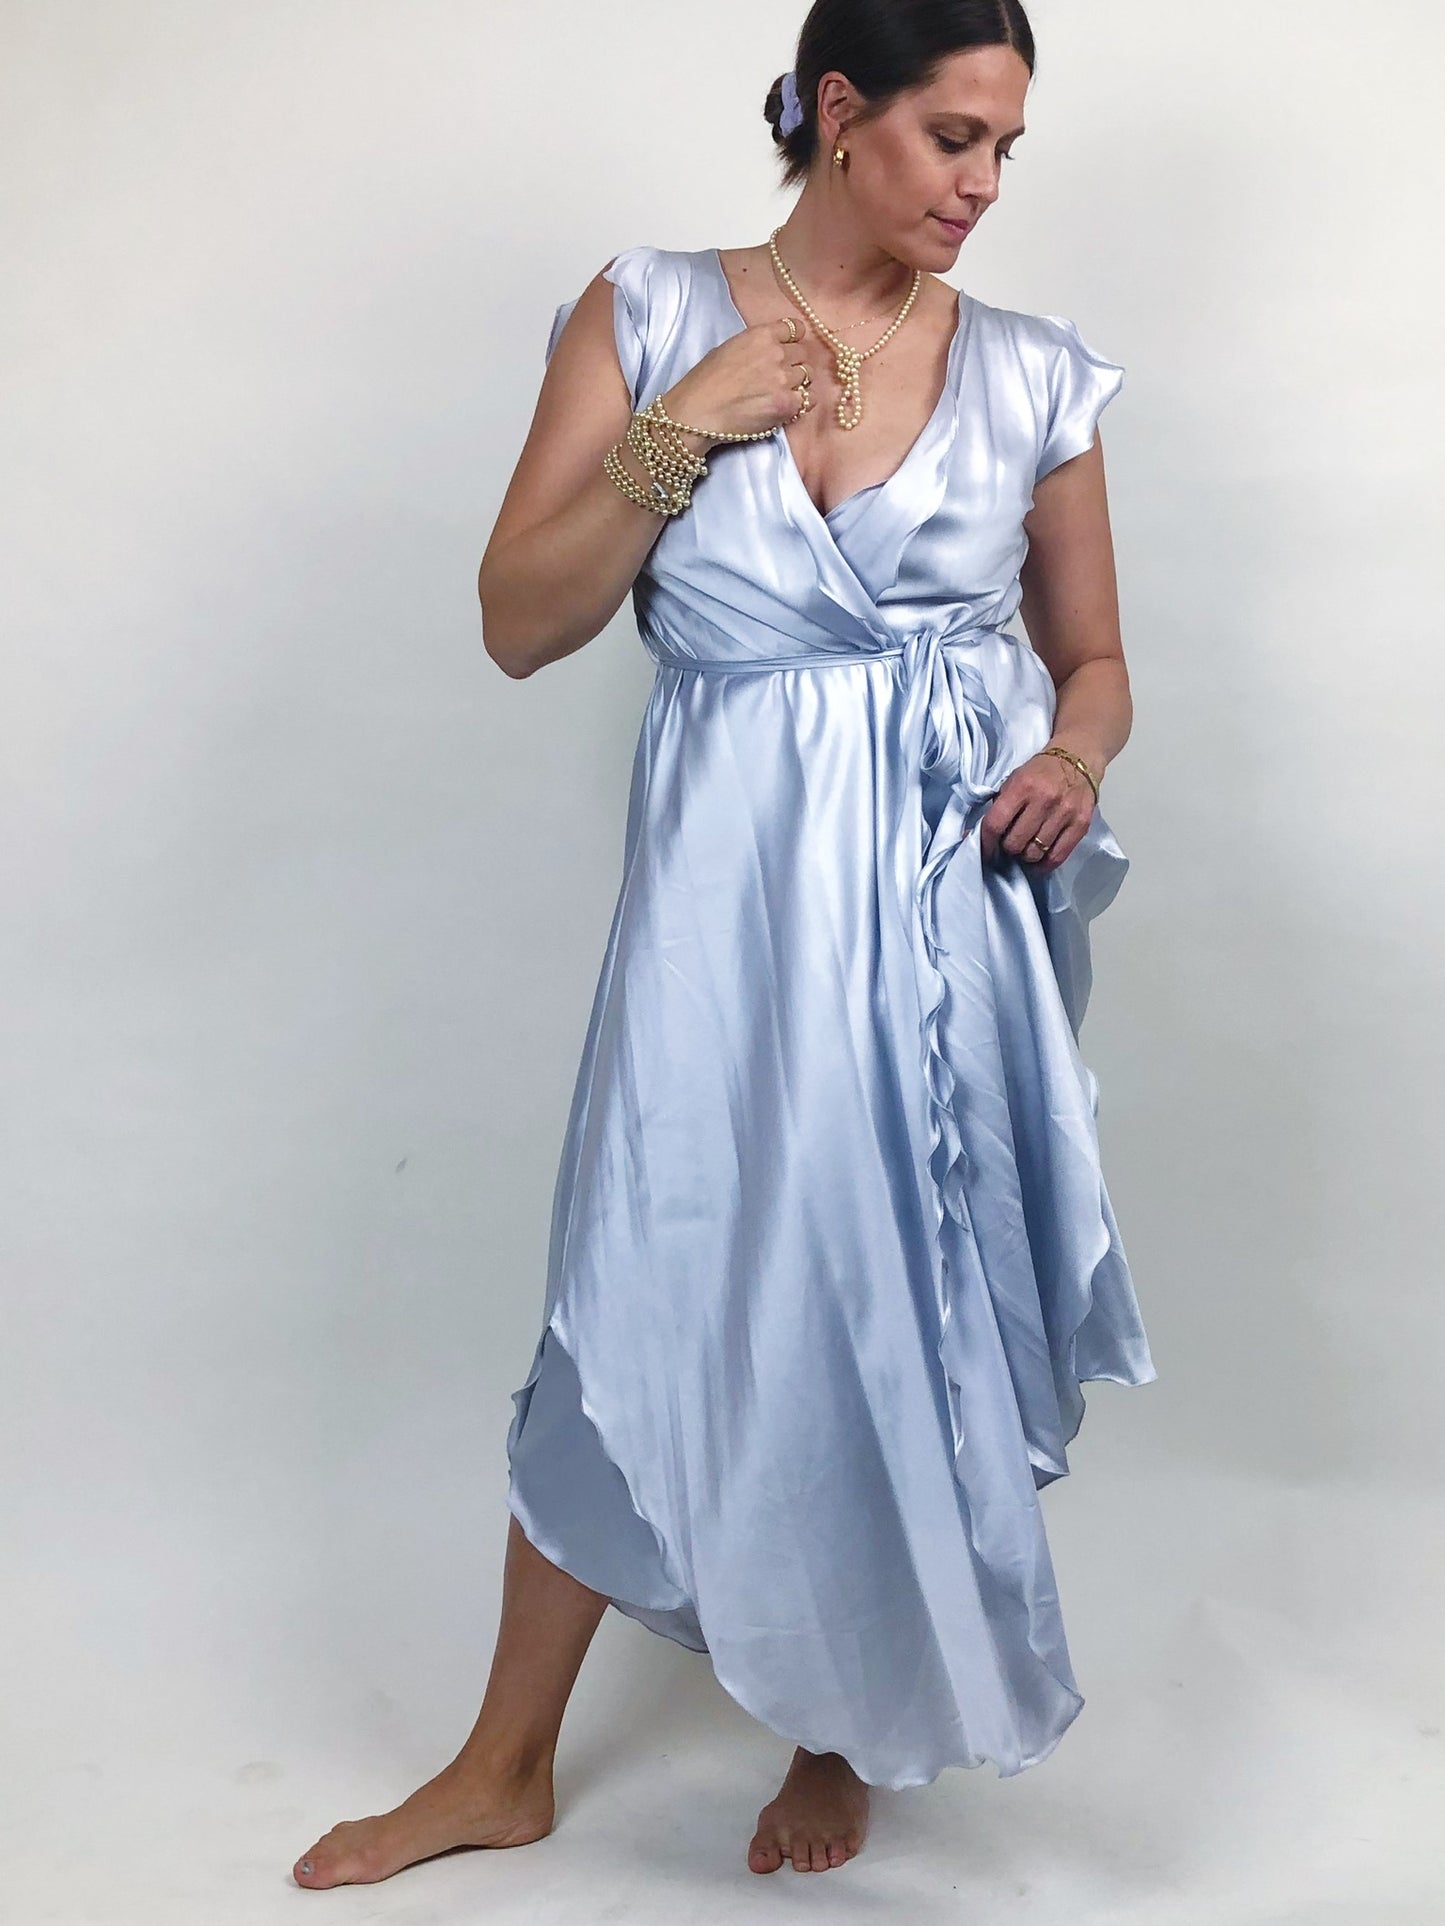 Sleeveless Nightgown & Robe Set by Georgette Trabolsi